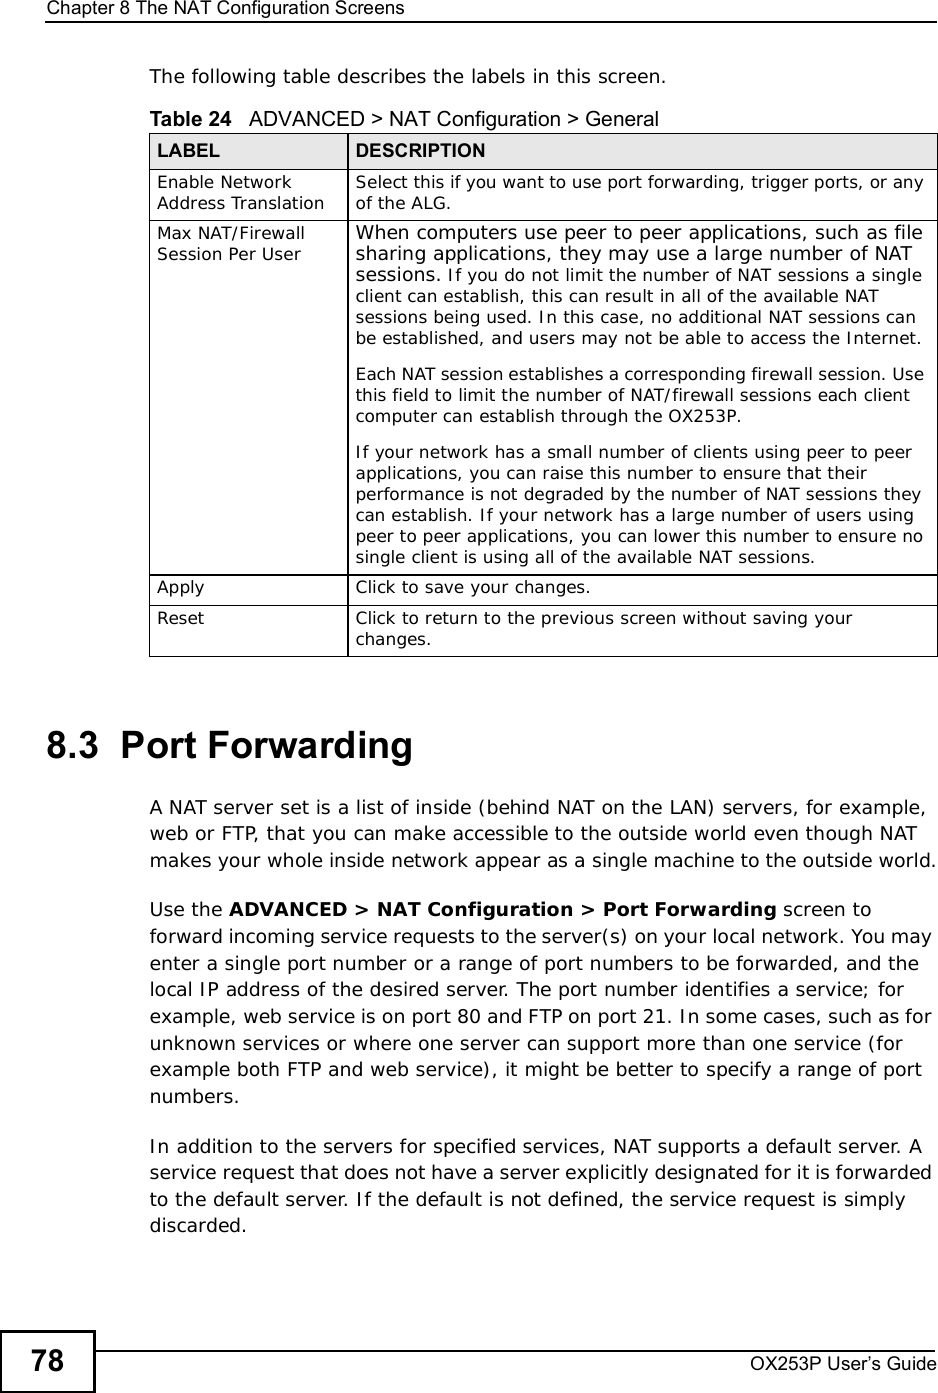 Chapter 8The NAT Configuration ScreensOX253P User’s Guide78The following table describes the labels in this screen.8.3  Port Forwarding A NAT server set is a list of inside (behind NAT on the LAN) servers, for example, web or FTP, that you can make accessible to the outside world even though NAT makes your whole inside network appear as a single machine to the outside world.Use the ADVANCED &gt; NAT Configuration &gt; Port Forwarding screen to forward incoming service requests to the server(s) on your local network. You may enter a single port number or a range of port numbers to be forwarded, and the local IP address of the desired server. The port number identifies a service; for example, web service is on port 80 and FTP on port 21. In some cases, such as for unknown services or where one server can support more than one service (for example both FTP and web service), it might be better to specify a range of port numbers. In addition to the servers for specified services, NAT supports a default server. A service request that does not have a server explicitly designated for it is forwarded to the default server. If the default is not defined, the service request is simply discarded.Table 24   ADVANCED &gt; NAT Configuration &gt; GeneralLABEL DESCRIPTIONEnable Network Address Translation Select this if you want to use port forwarding, trigger ports, or any of the ALG.Max NAT/Firewall Session Per User When computers use peer to peer applications, such as file sharing applications, they may use a large number of NAT sessions. If you do not limit the number of NAT sessions a single client can establish, this can result in all of the available NAT sessions being used. In this case, no additional NAT sessions can be established, and users may not be able to access the Internet. Each NAT session establishes a corresponding firewall session. Use this field to limit the number of NAT/firewall sessions each client computer can establish through the OX253P. If your network has a small number of clients using peer to peer applications, you can raise this number to ensure that their performance is not degraded by the number of NAT sessions they can establish. If your network has a large number of users using peer to peer applications, you can lower this number to ensure no single client is using all of the available NAT sessions. Apply Click to save your changes.ResetClick to return to the previous screen without saving your changes.